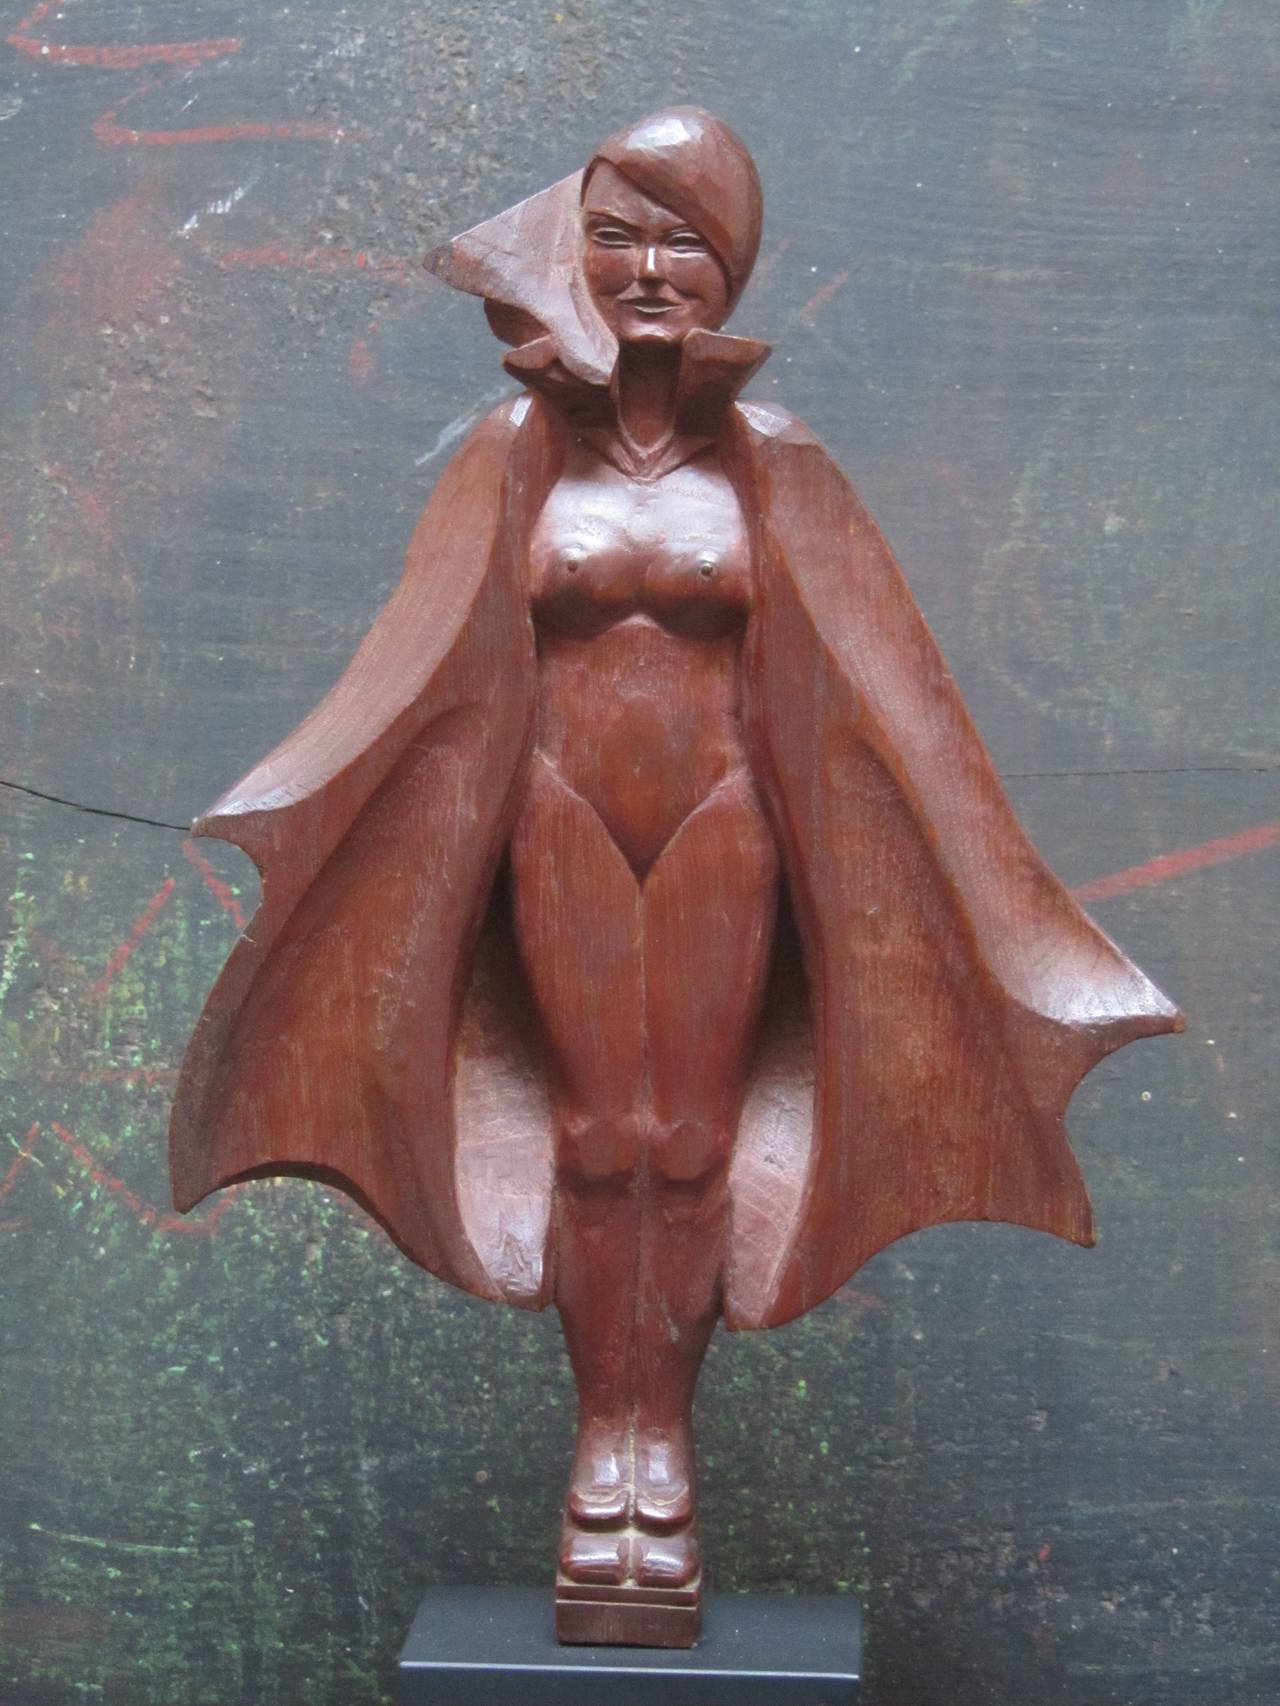 A fantasy carving of a woman in a cape revealing herself. I don't know who the carver was but would date it to the 1930s. The way the billowing cape frames the figure is what makes this folk sculpture spacial and gives her mystery. Unusual also from